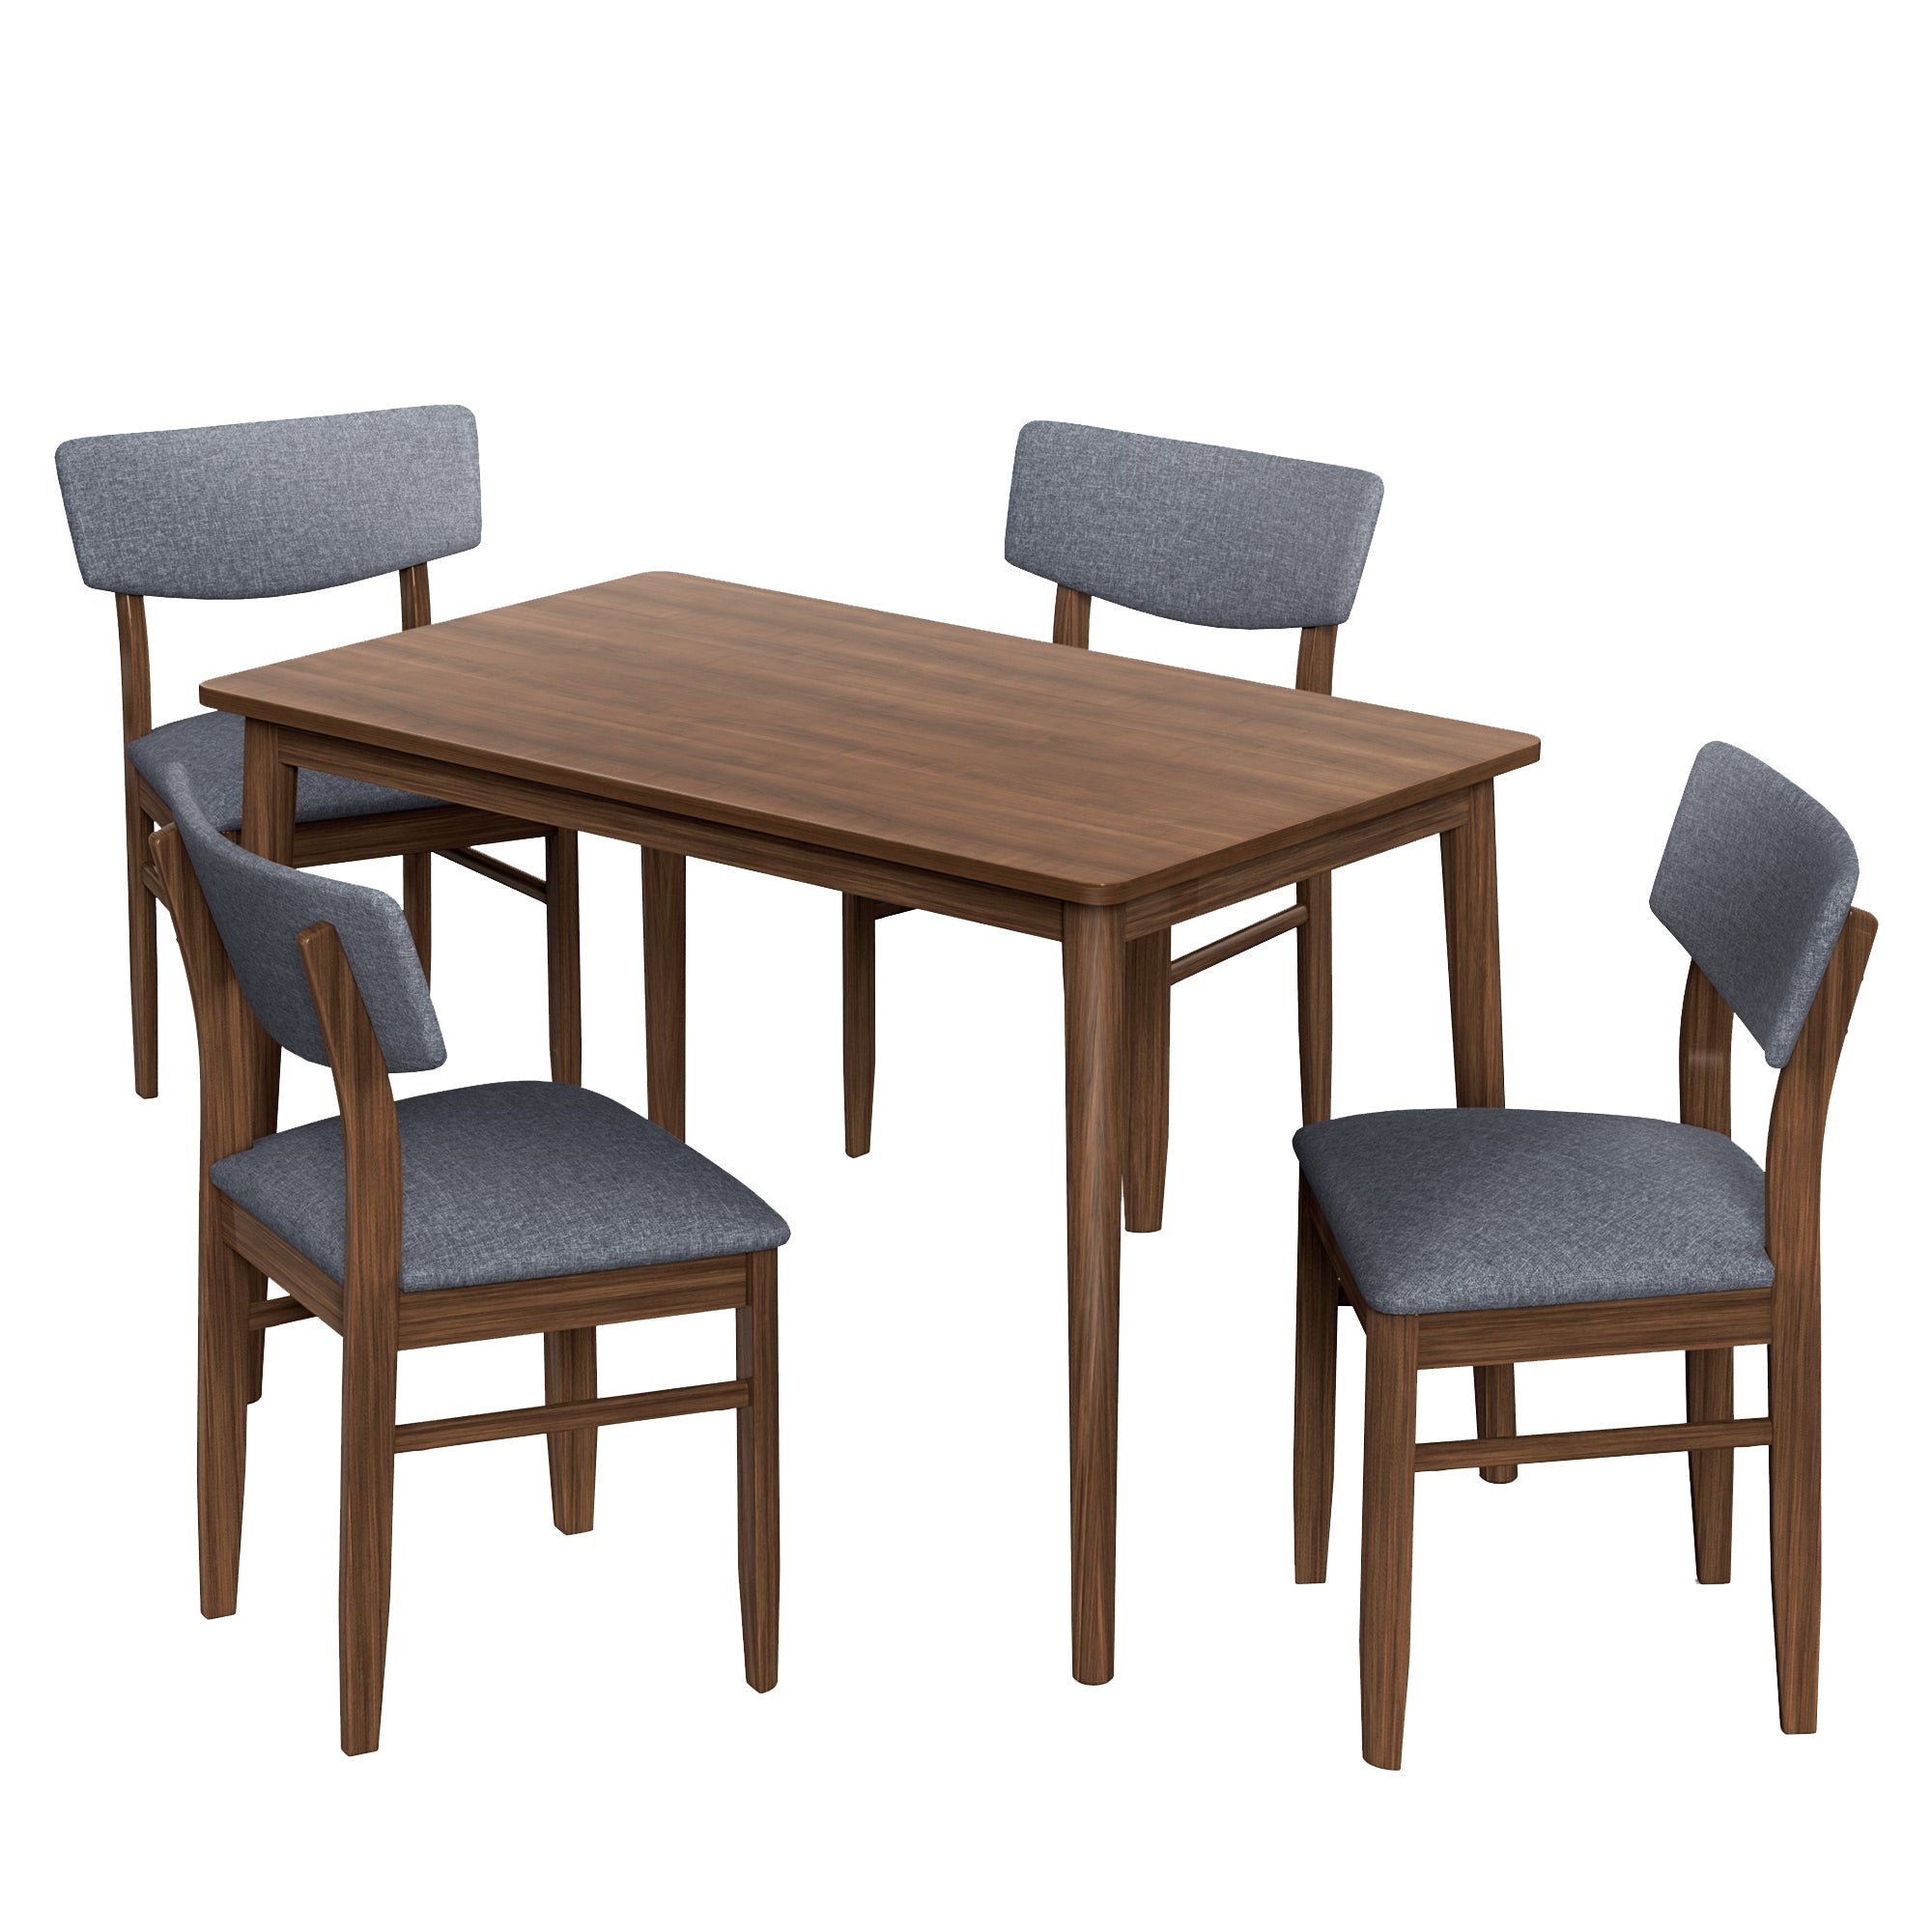 5 Pieces Modern Dining Table Set with 1 Rectangular walnut-rubber wood